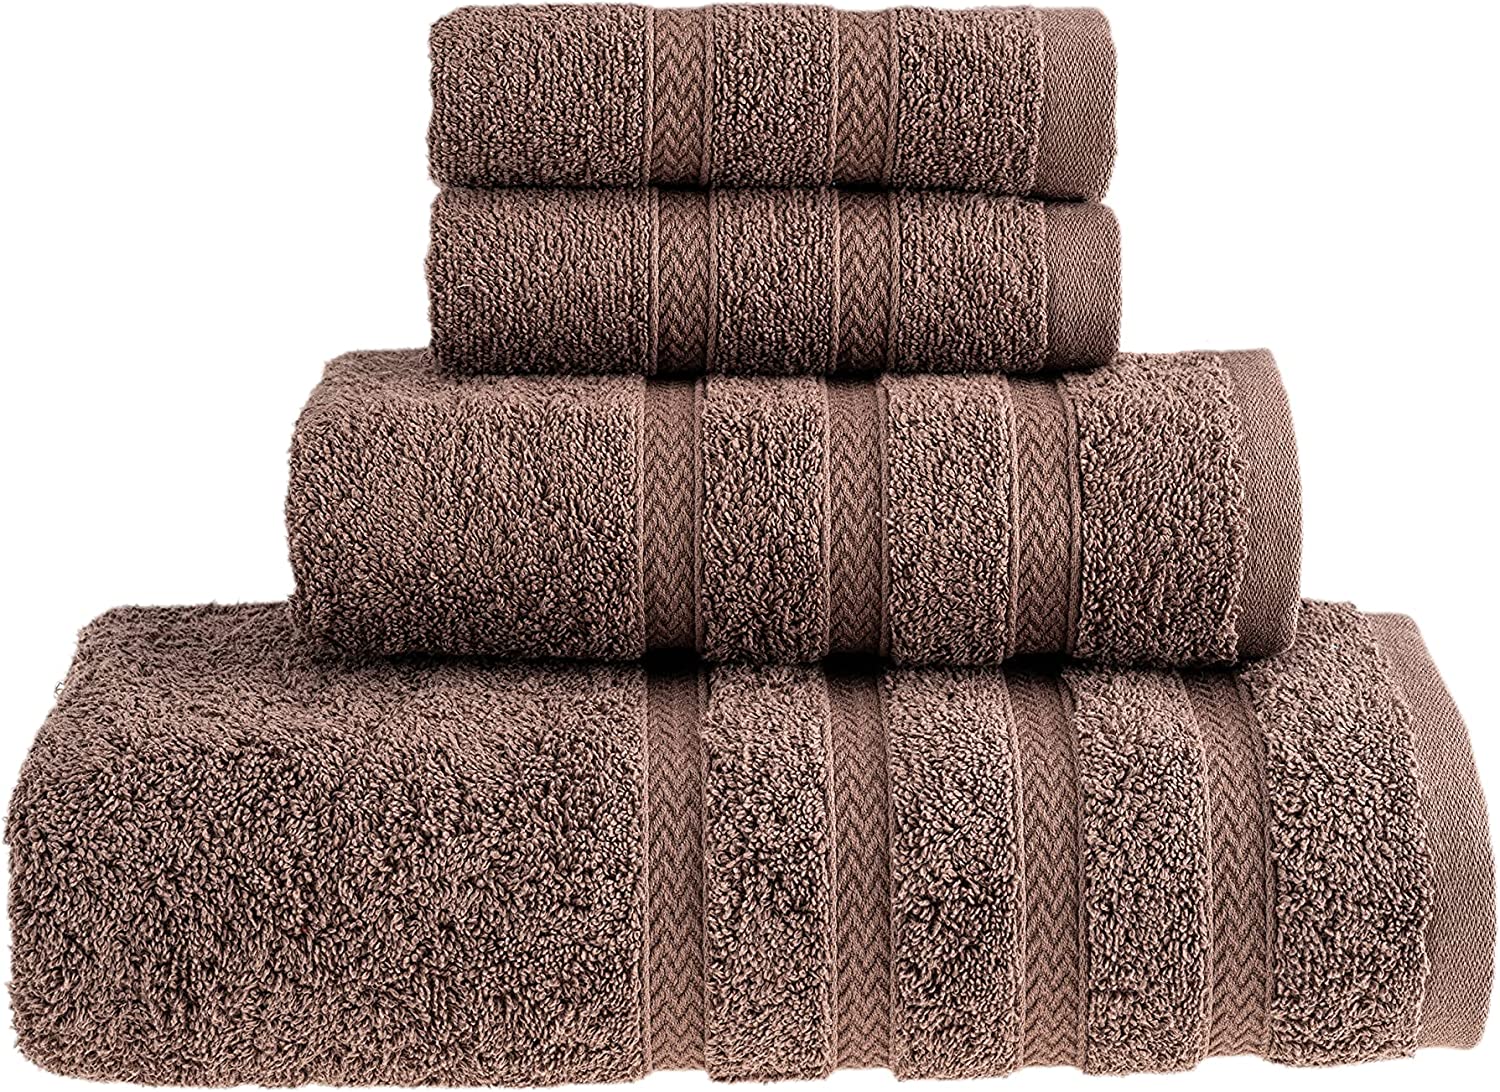 HALLEY Decorative Bath Towels Set, 6 Piece - Turkish Towel Set with Floral  Pattern, Highly Absorbent & Fade Resistant Fabric, 100% Cotton - Brown 